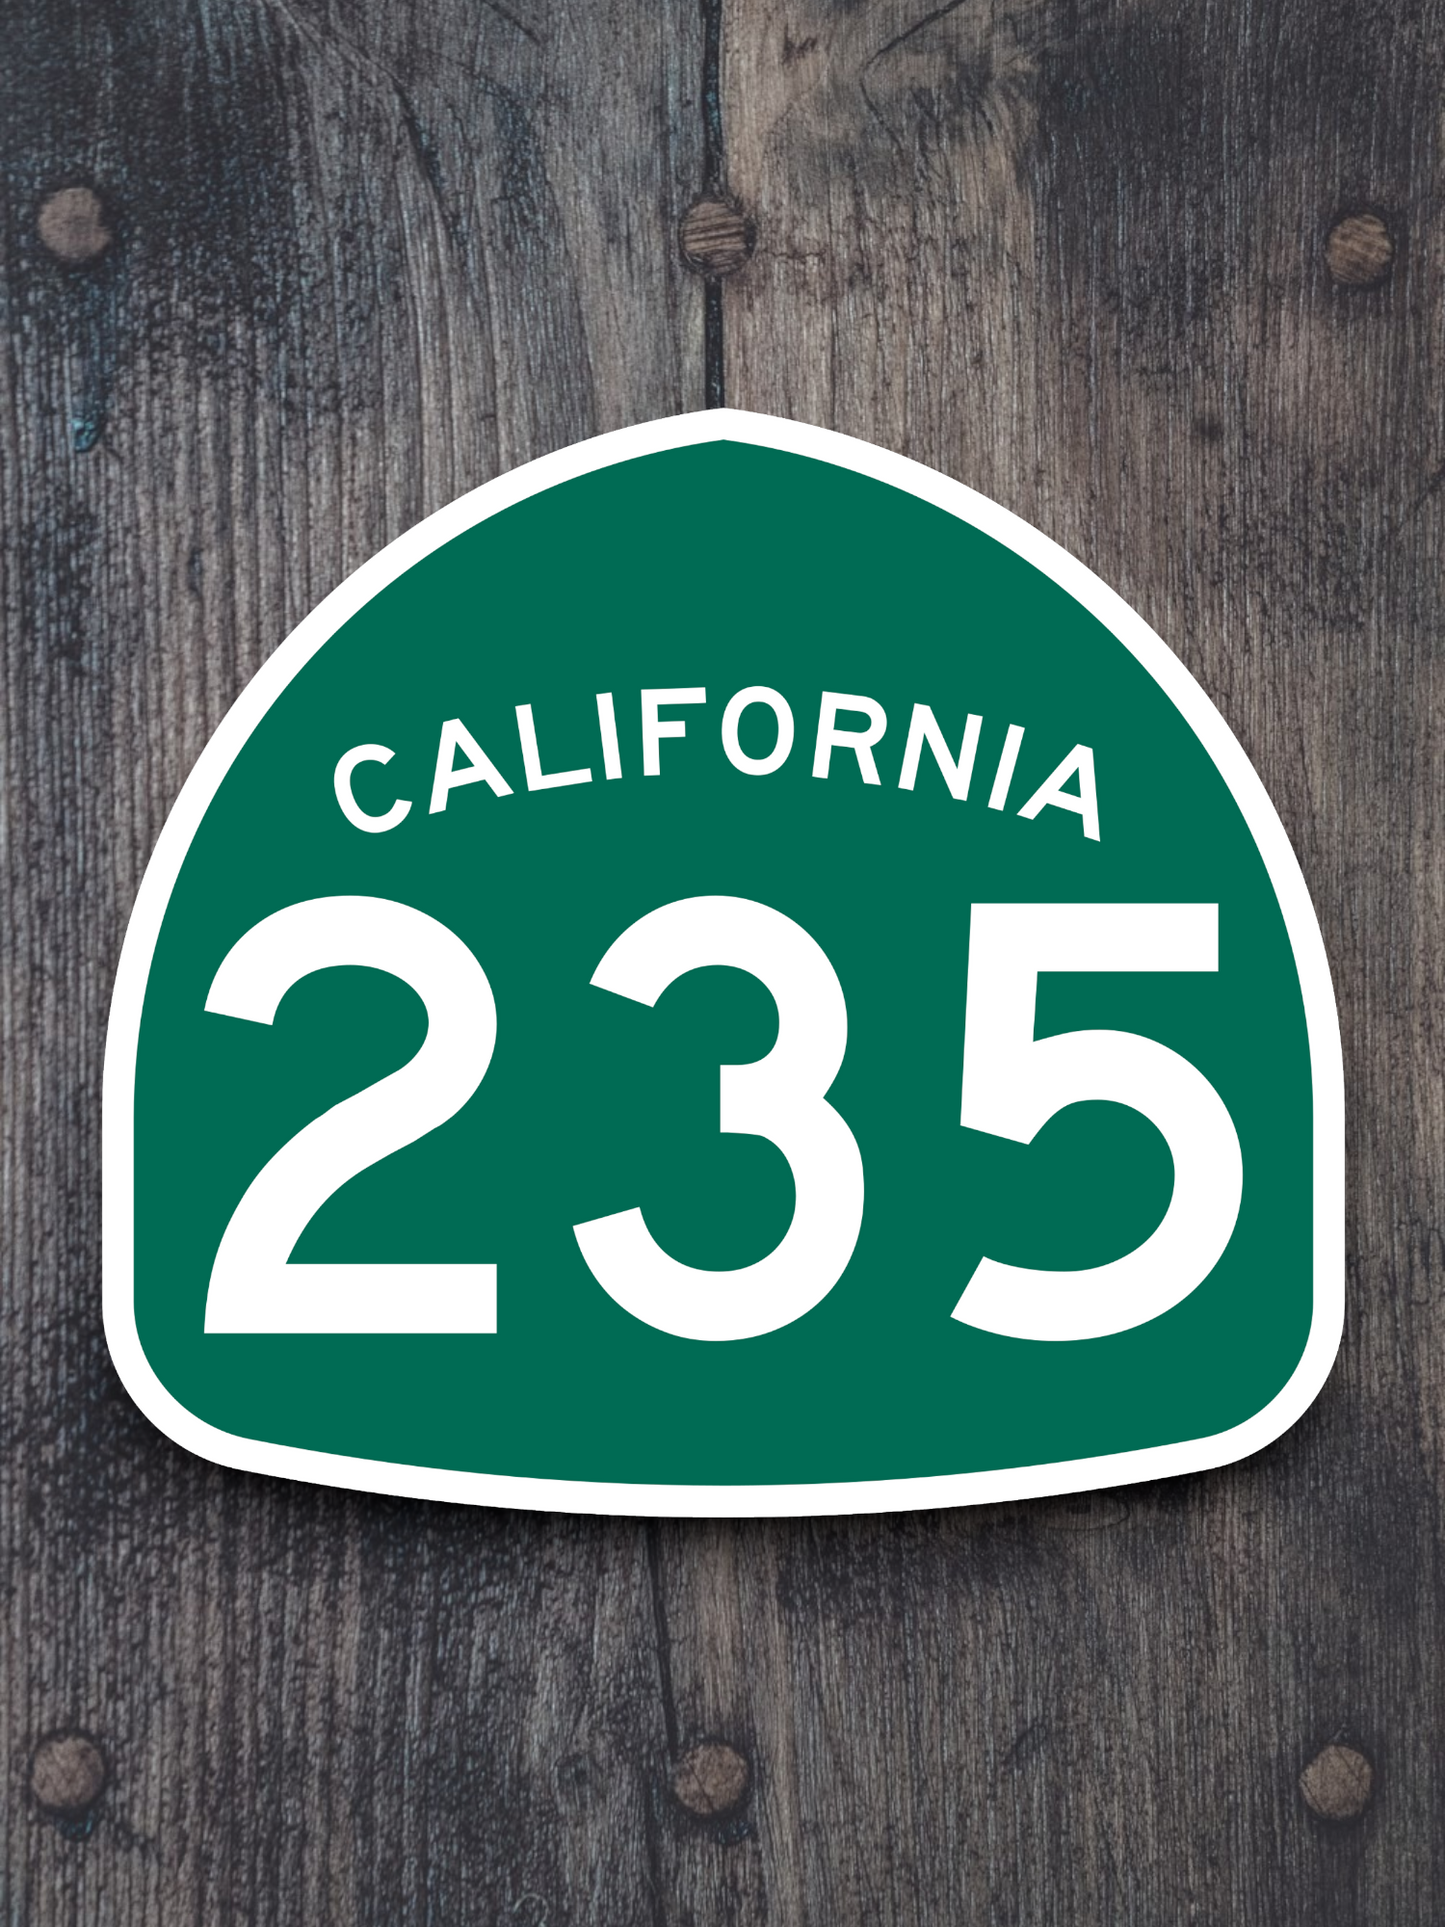 California State Route 235 Road Sign Sticker